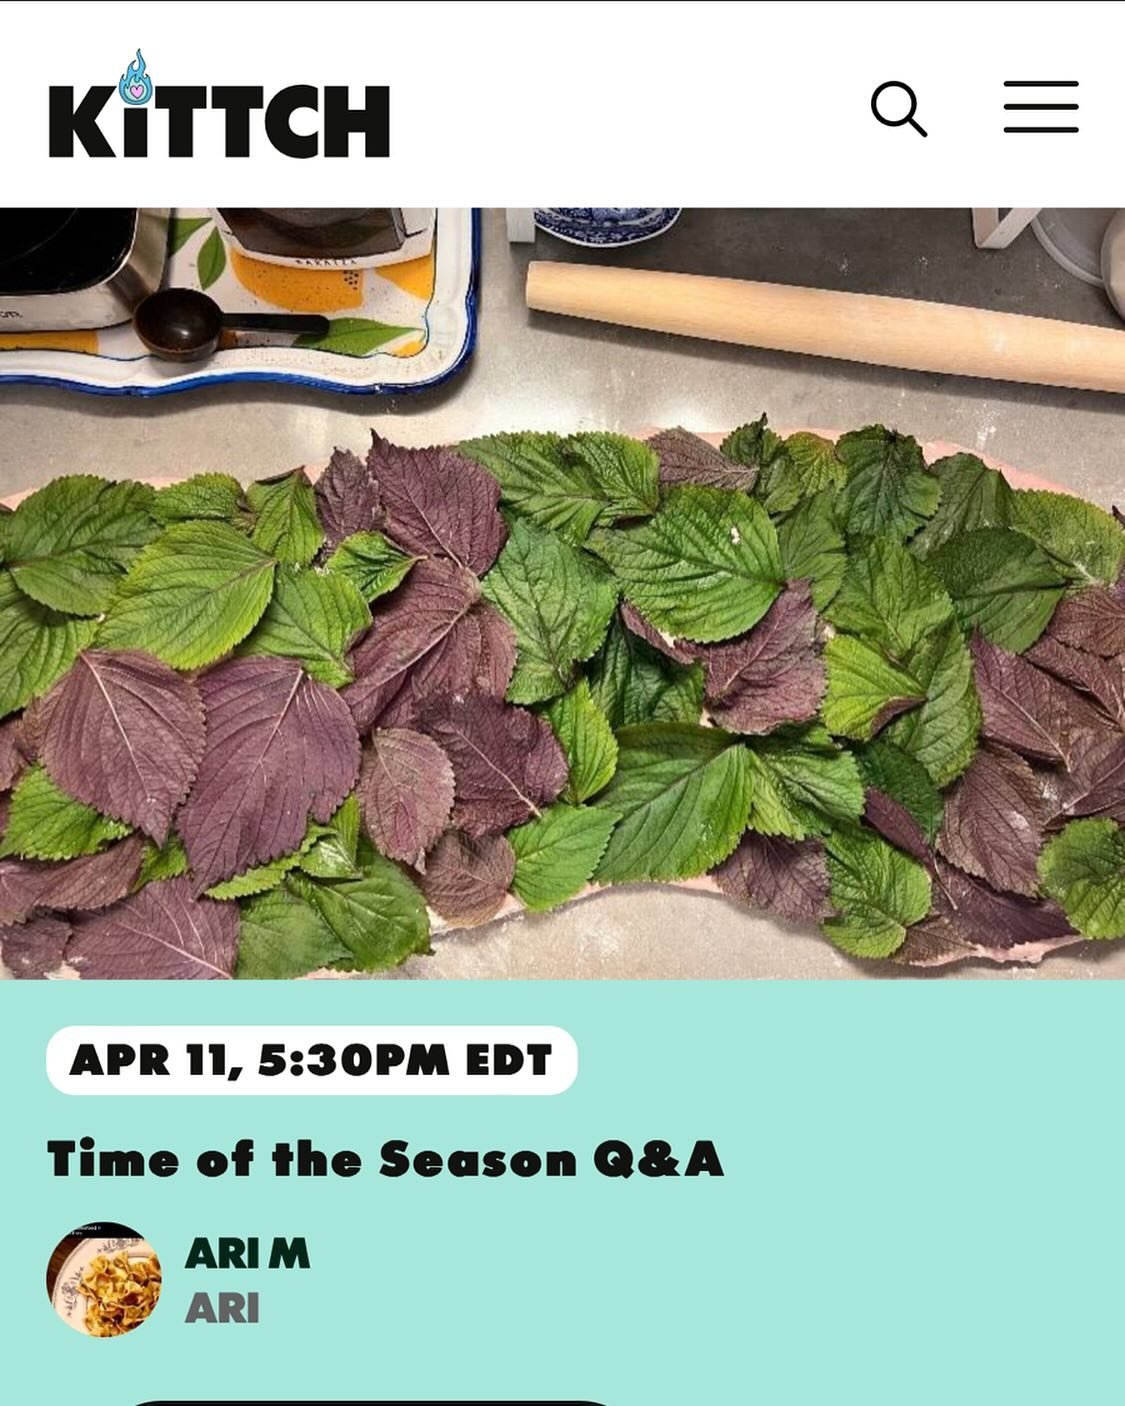 MY FIRST KITTCH! TOMORROW! (or today!) THURS 4/11 at 5:30PM!
💐 🌹 🌸 Let&rsquo;s talk about spring and the favorite things it brings with, from foraged goodies to what&rsquo;s best at your farmer&rsquo;s market. What&rsquo;s on your cooking to do li